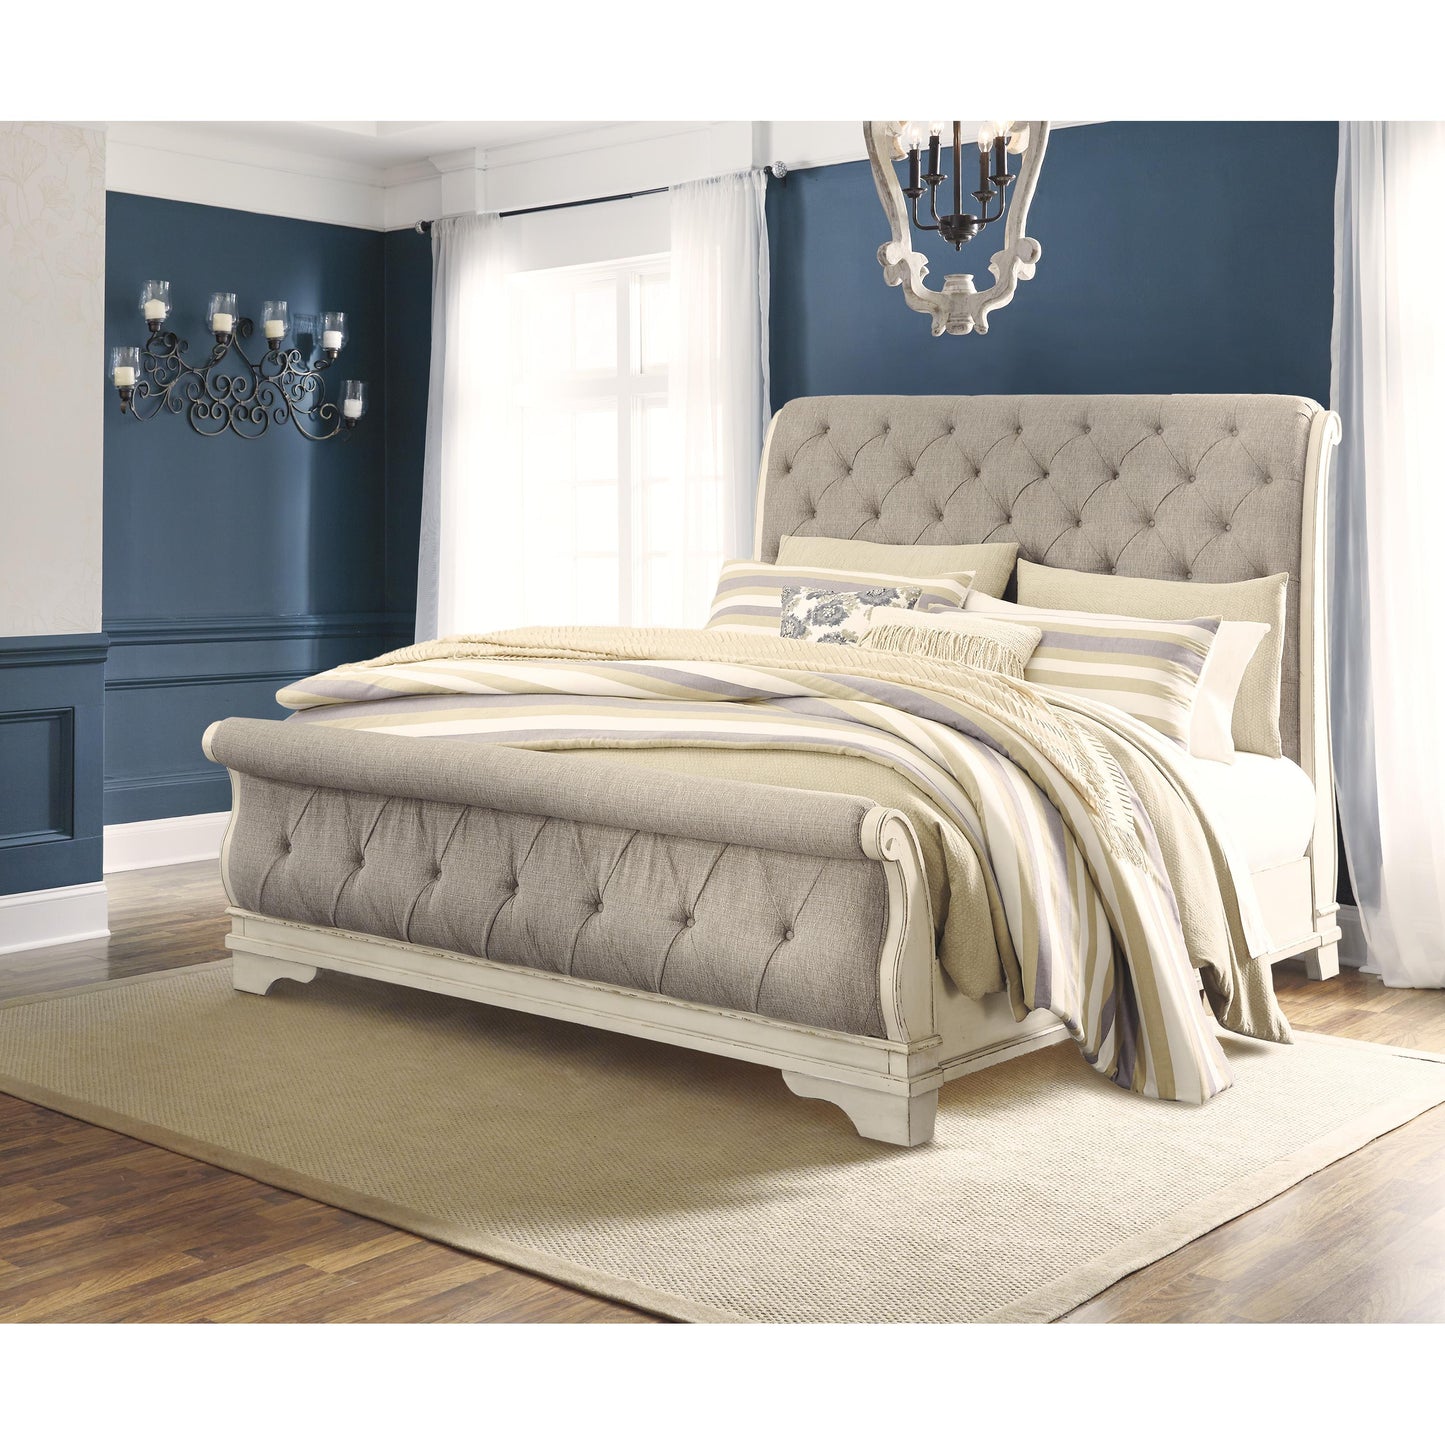 Signature Design by Ashley Realyn King Upholstered Sleigh Bed B743-78/B743-76/B743-99 IMAGE 5